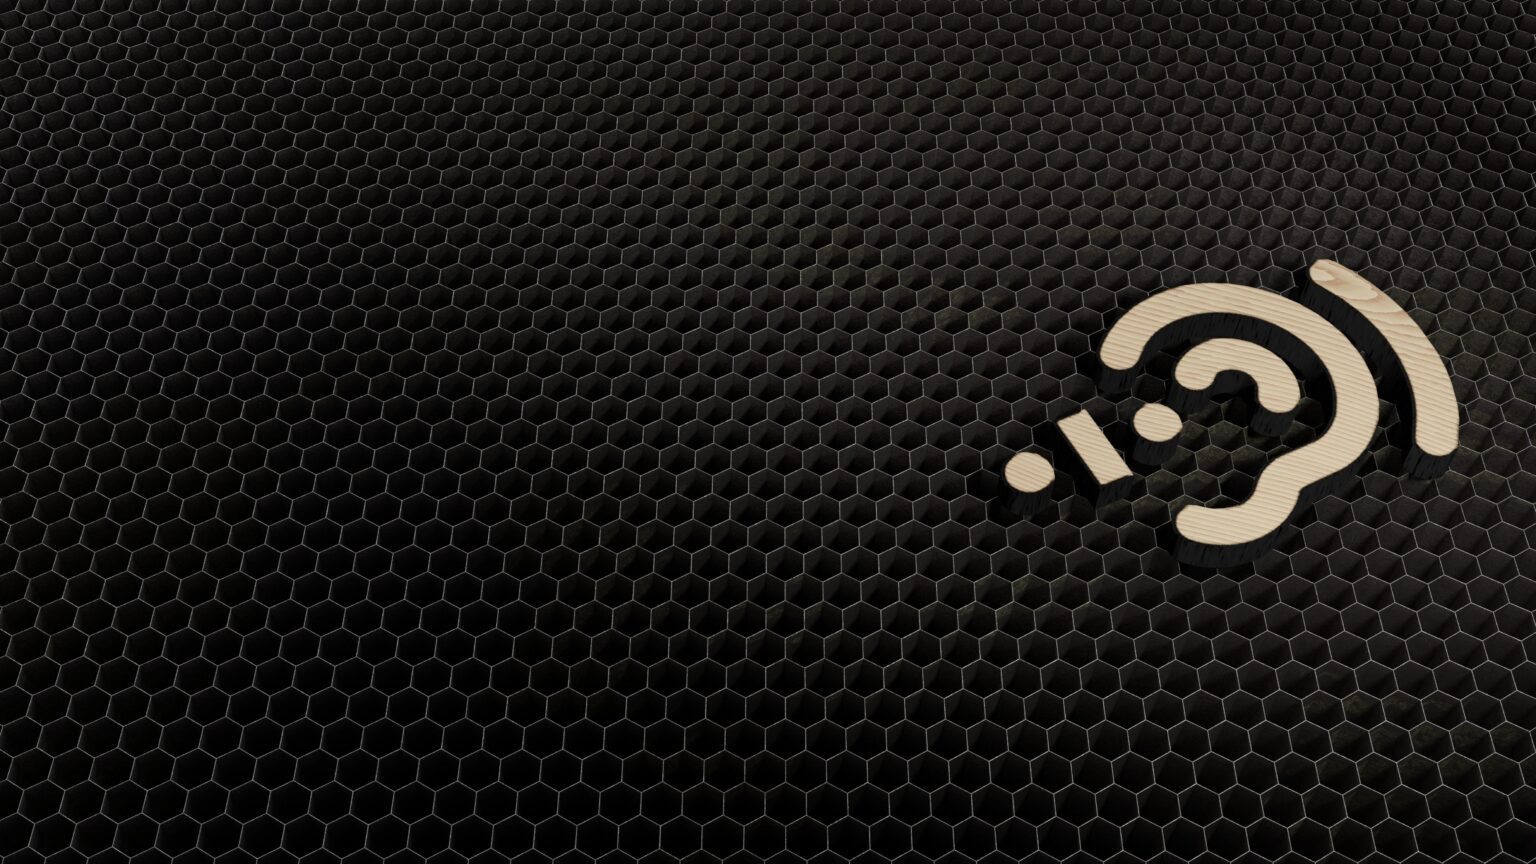 Black honeycomb as background with a image showing the symbol of assistive listening system.